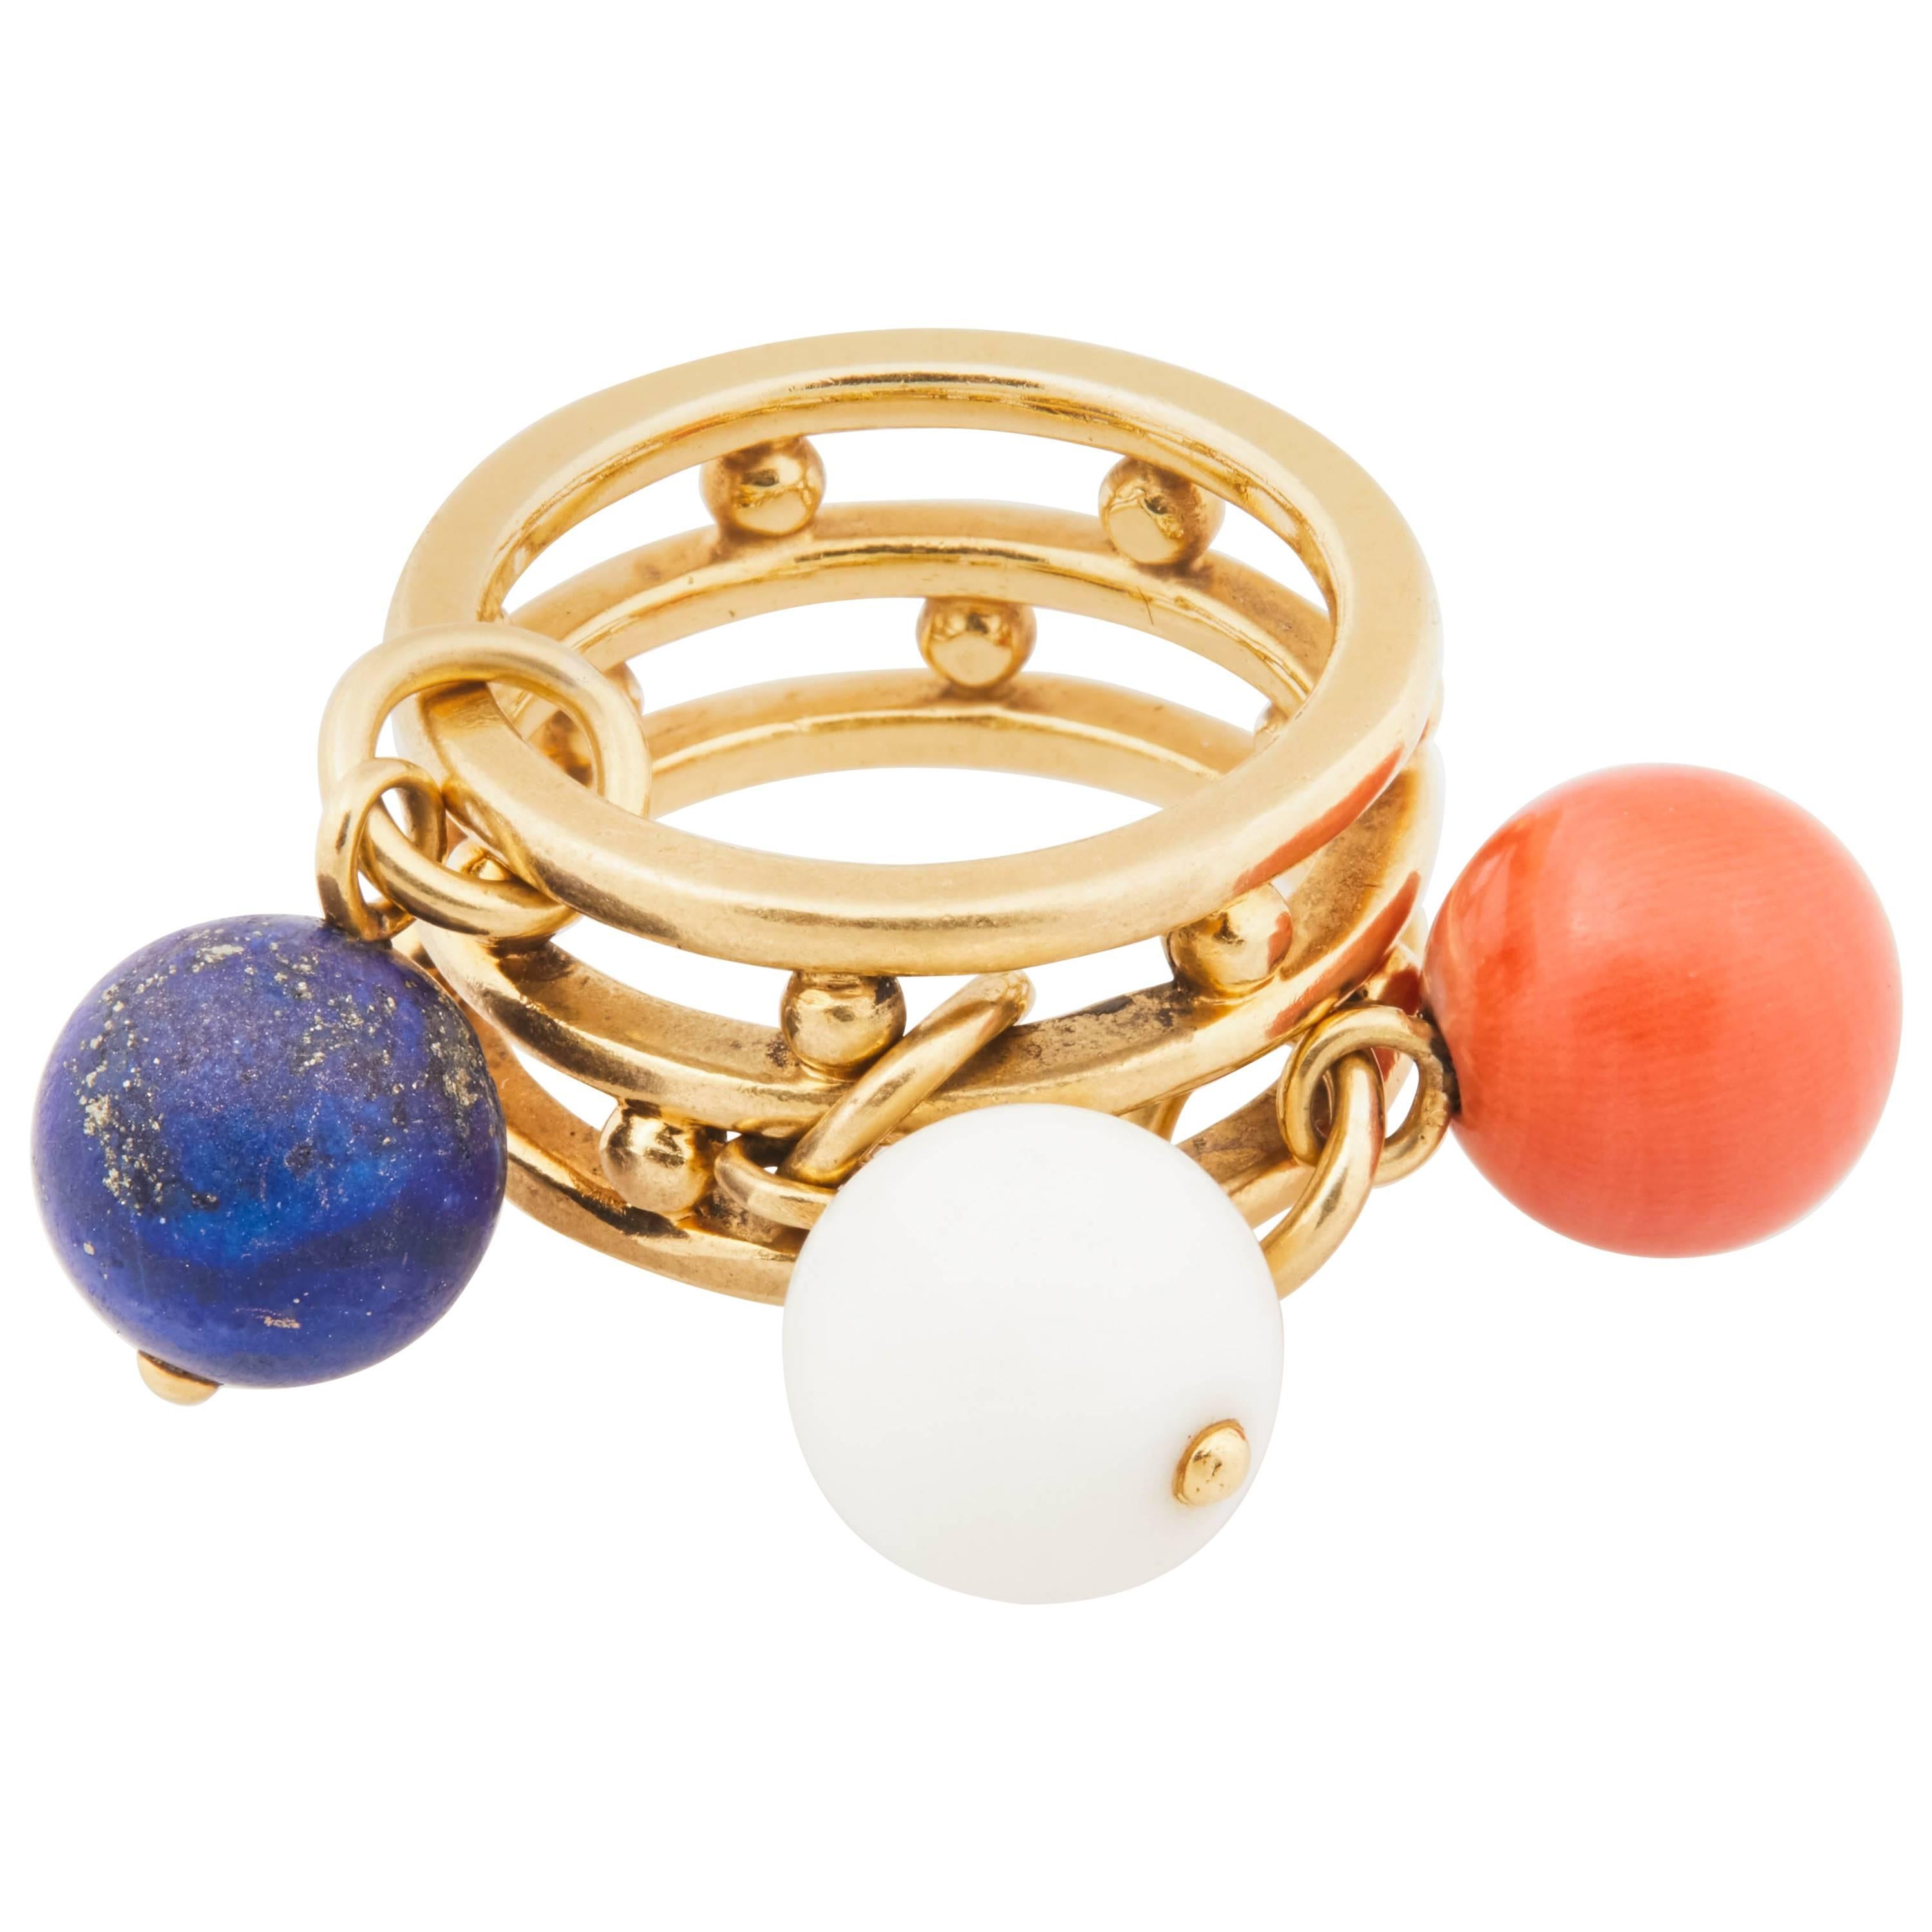 1970s French 18 Karat Gold Ring with Red and White Coral and Blue Lapis Beads